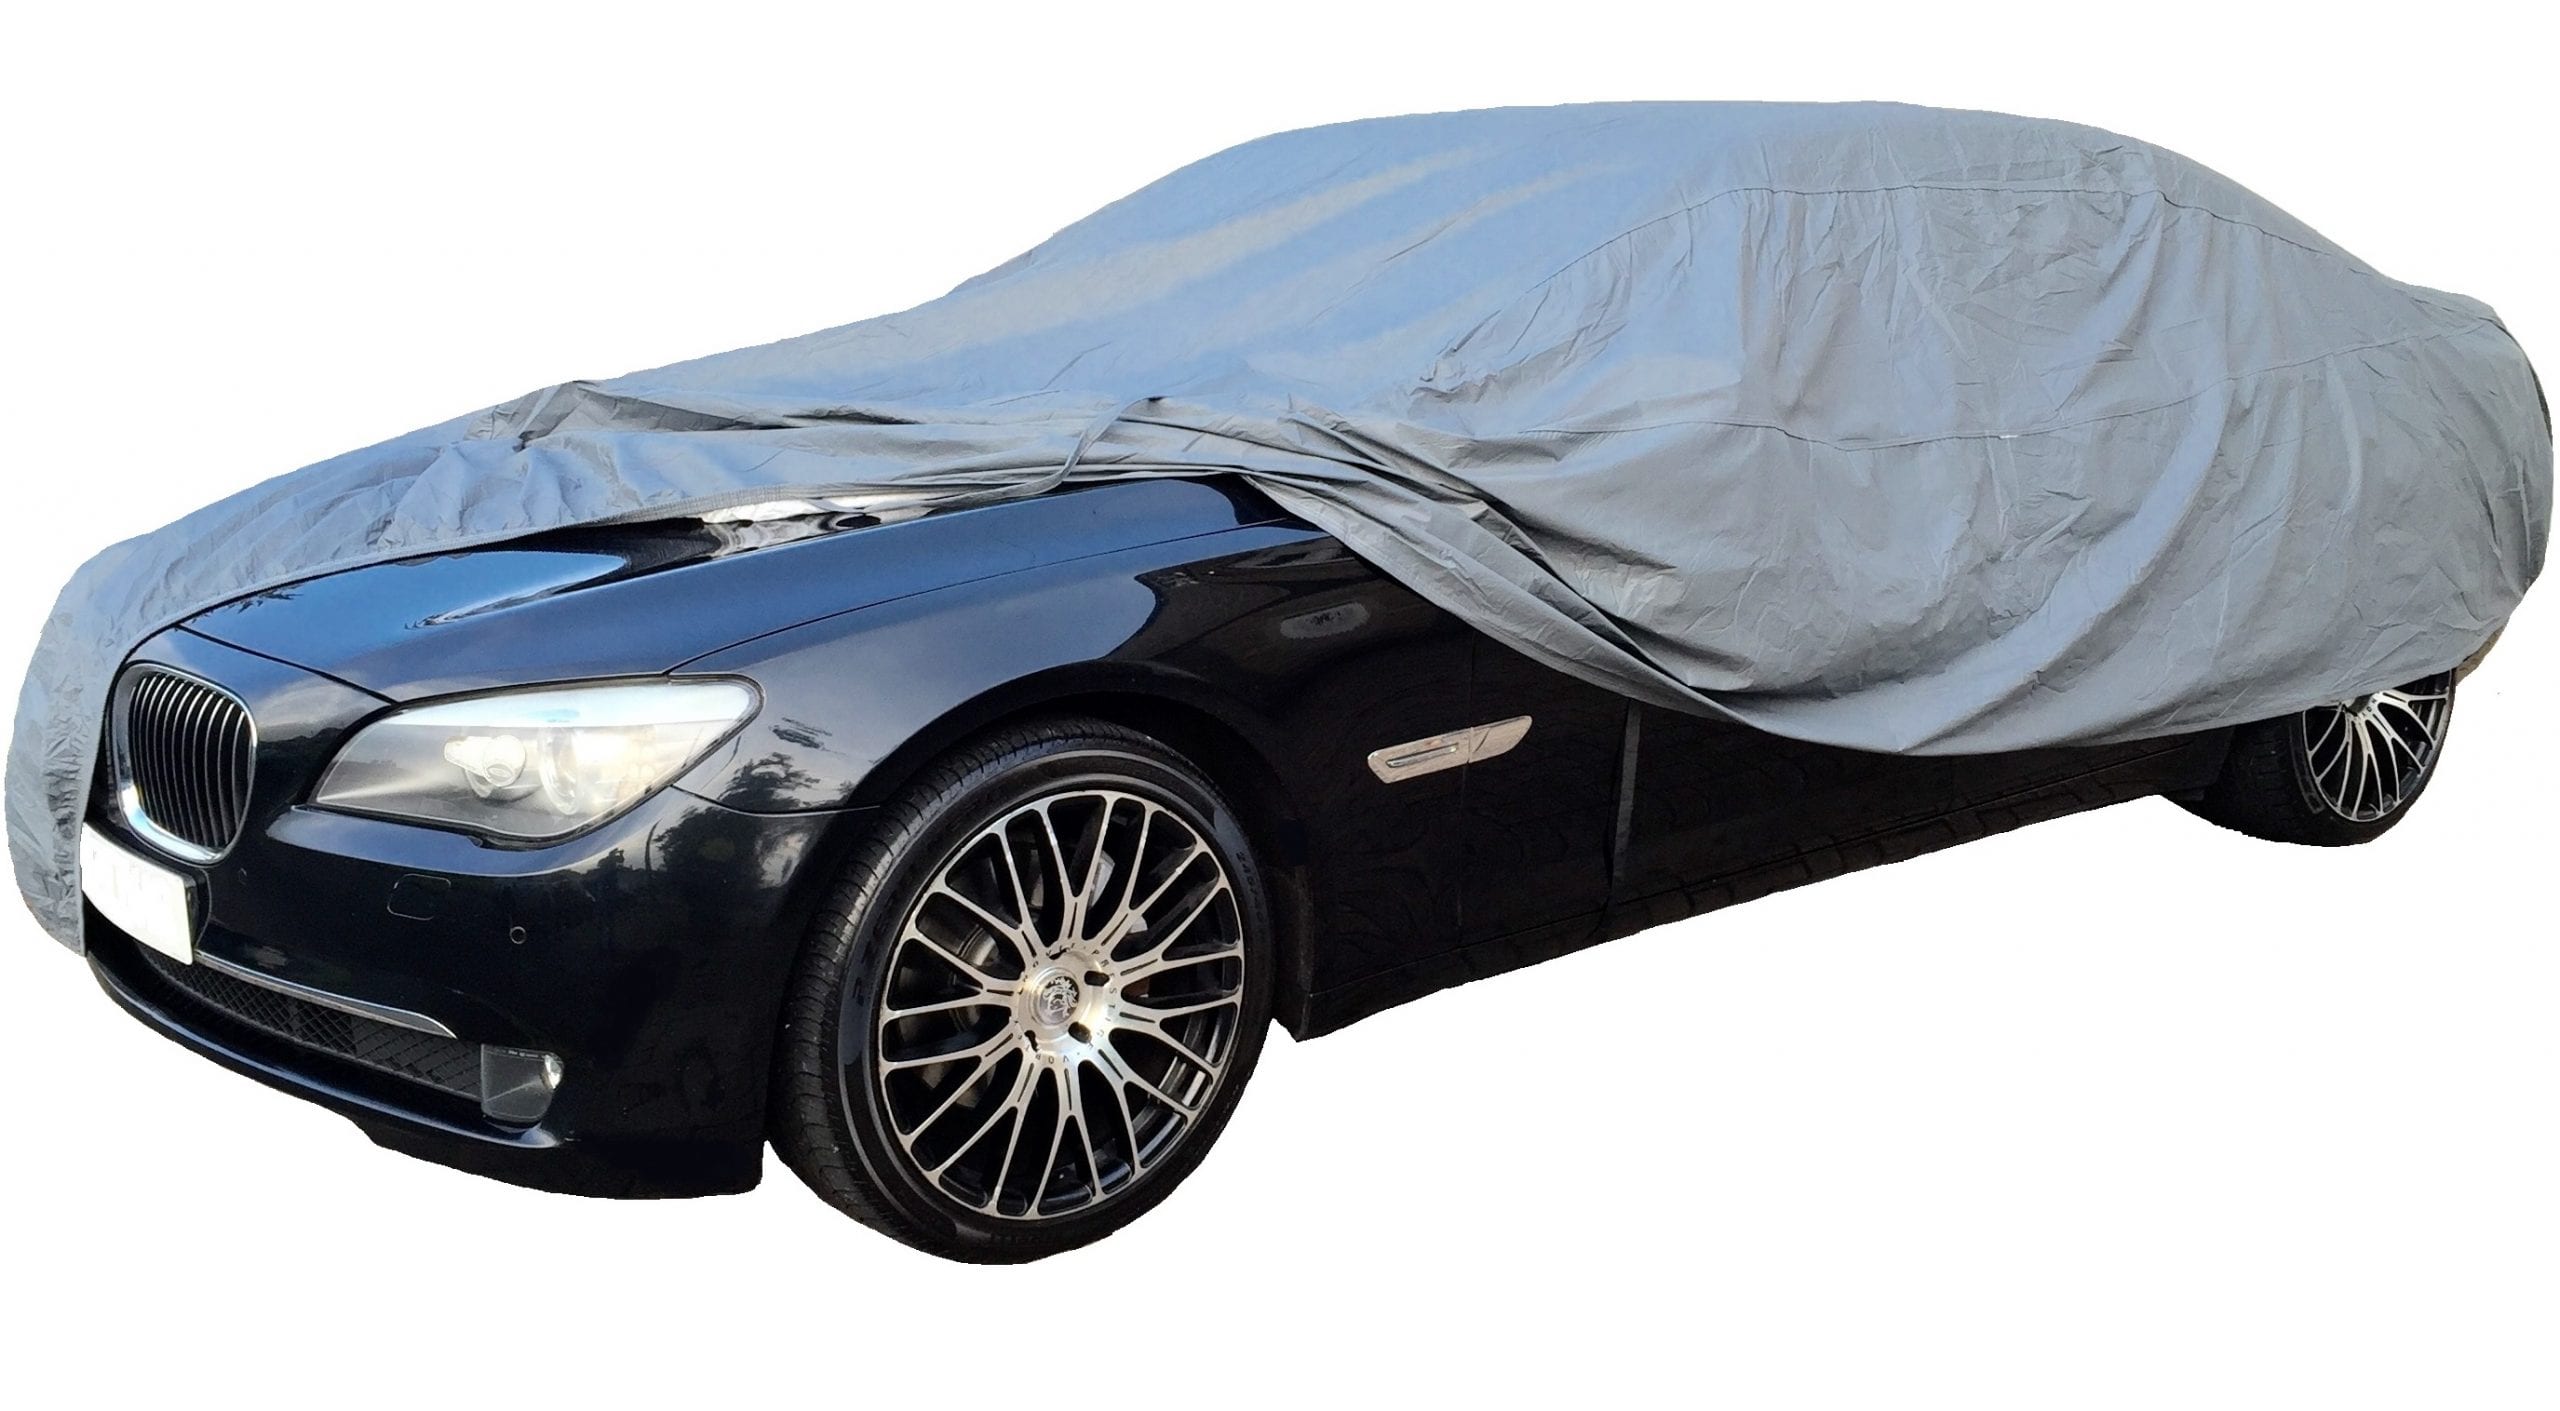 Allweather Perfect Gray Car Cover UV Waterproof Outdoor for Chevrolet Spark